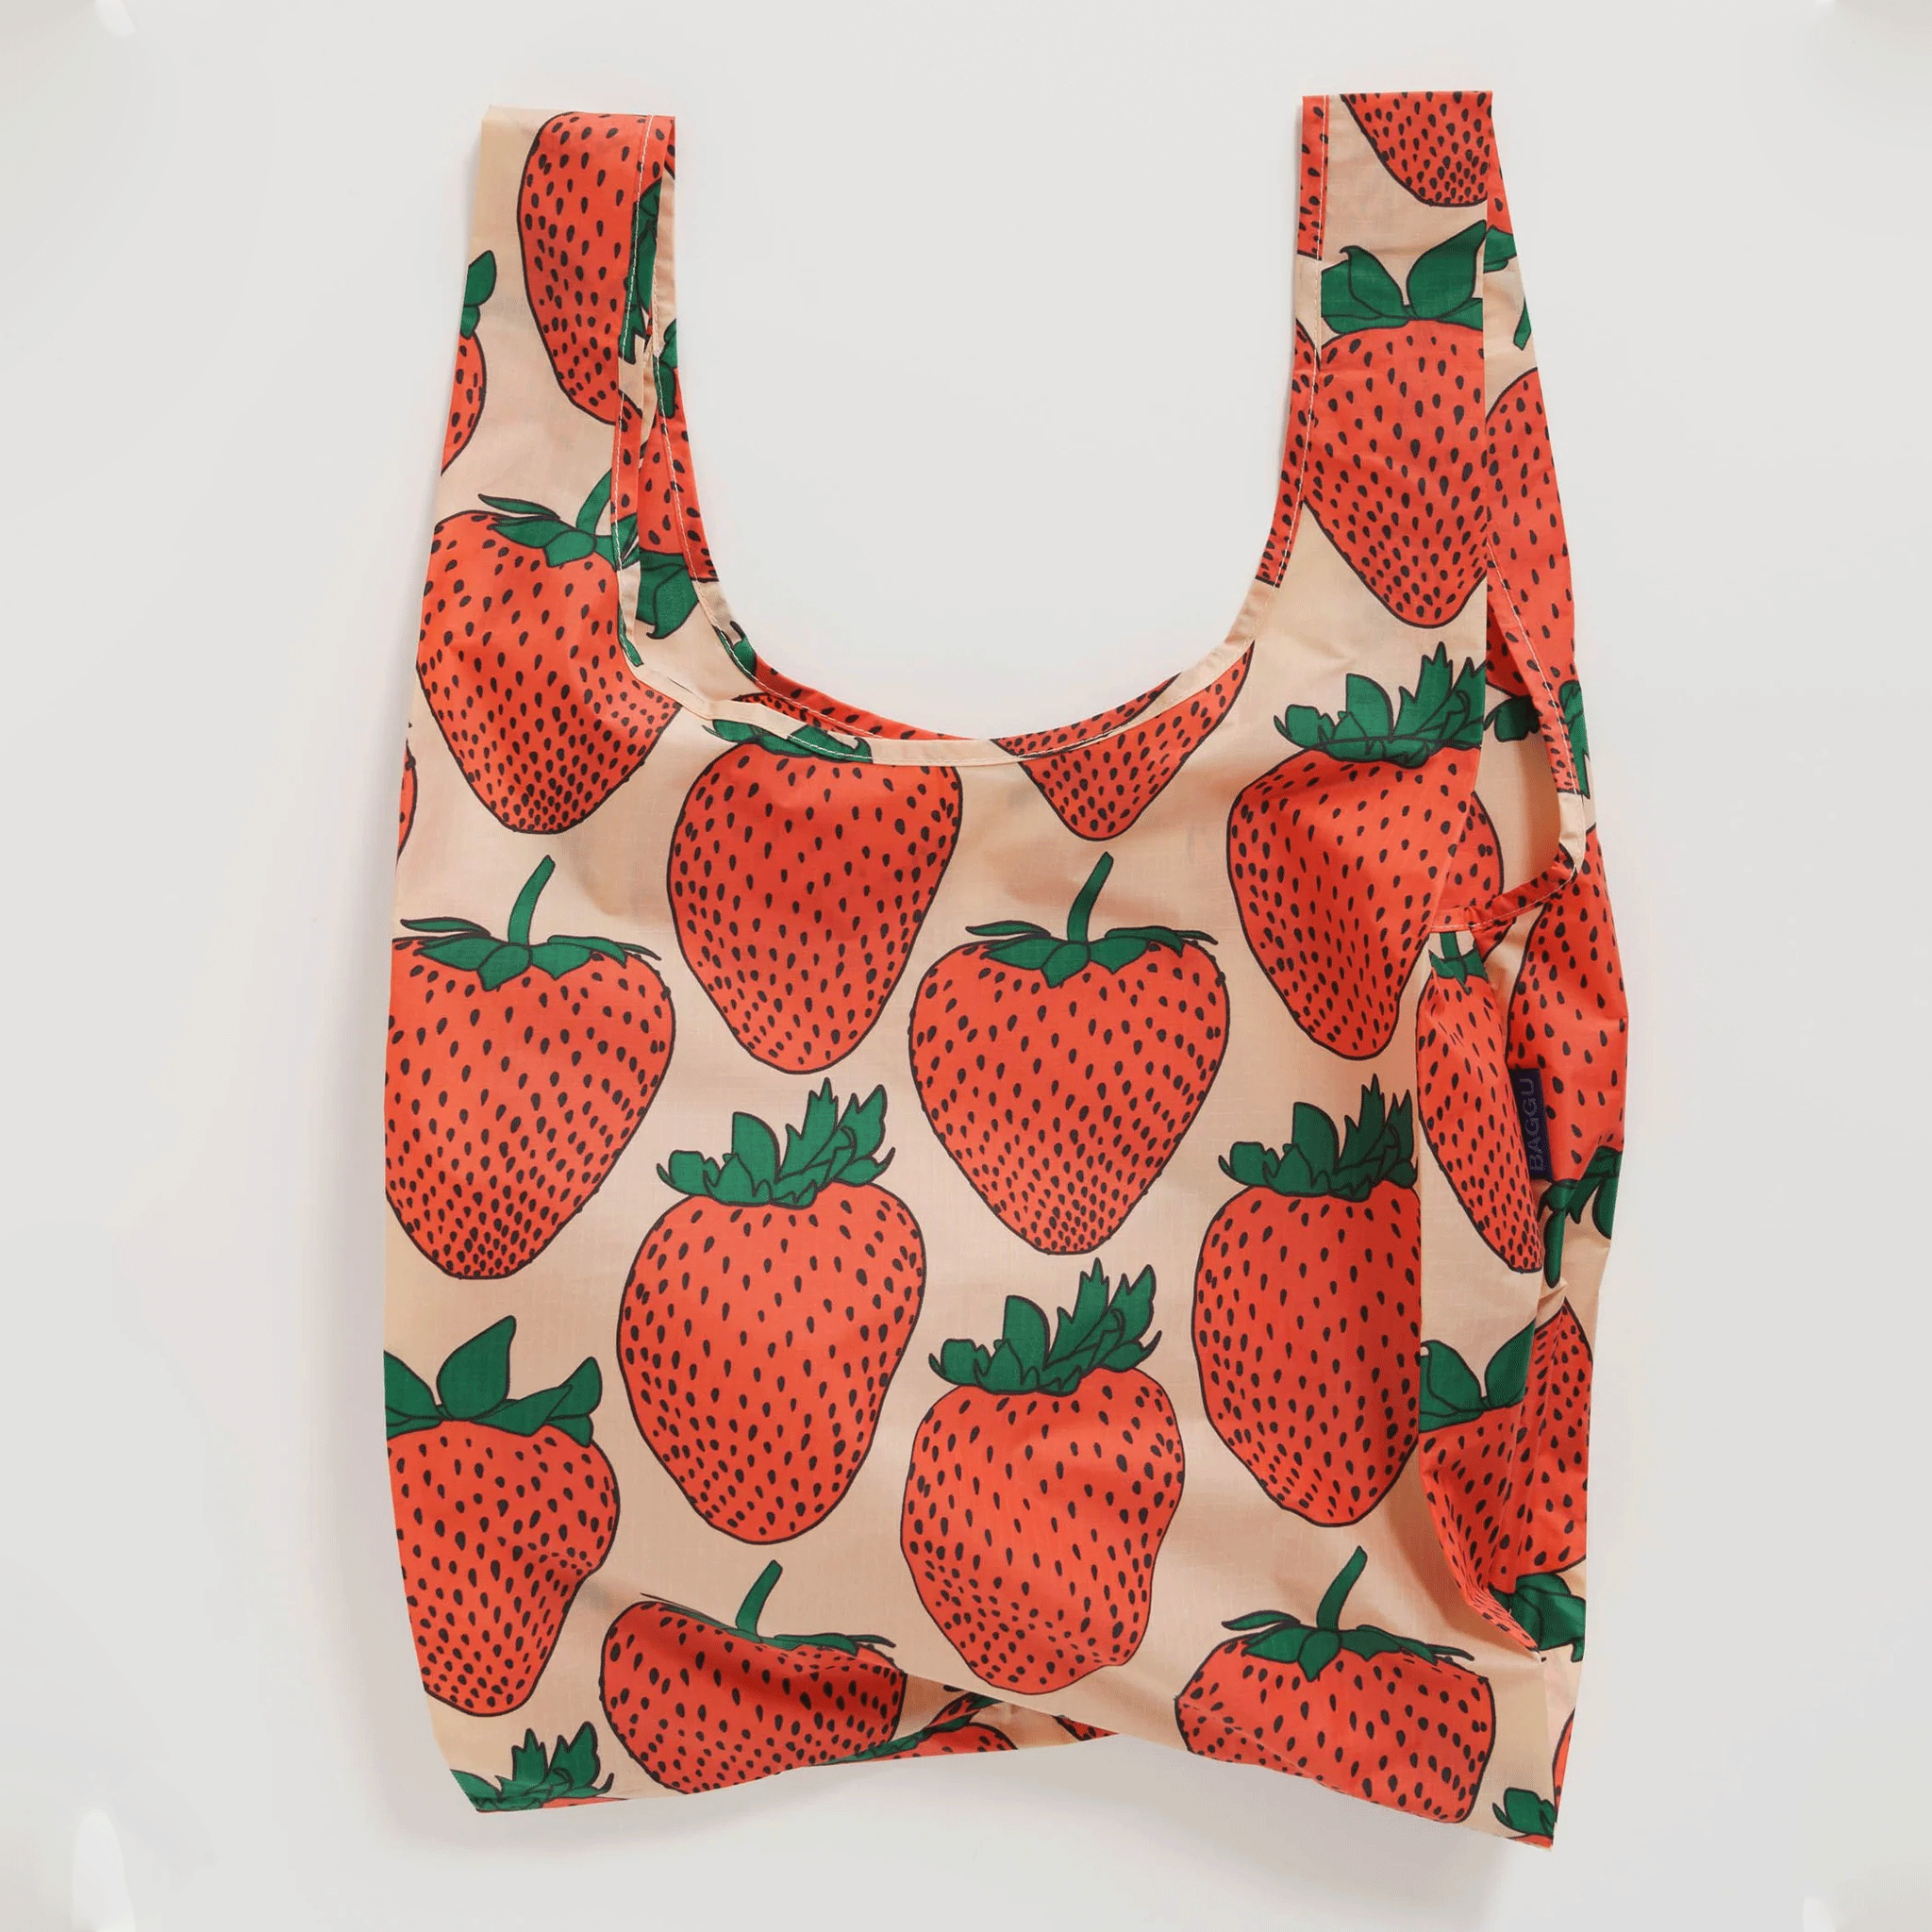 On a white background is a light pink and red strawberry patterned nylon tote bag. 